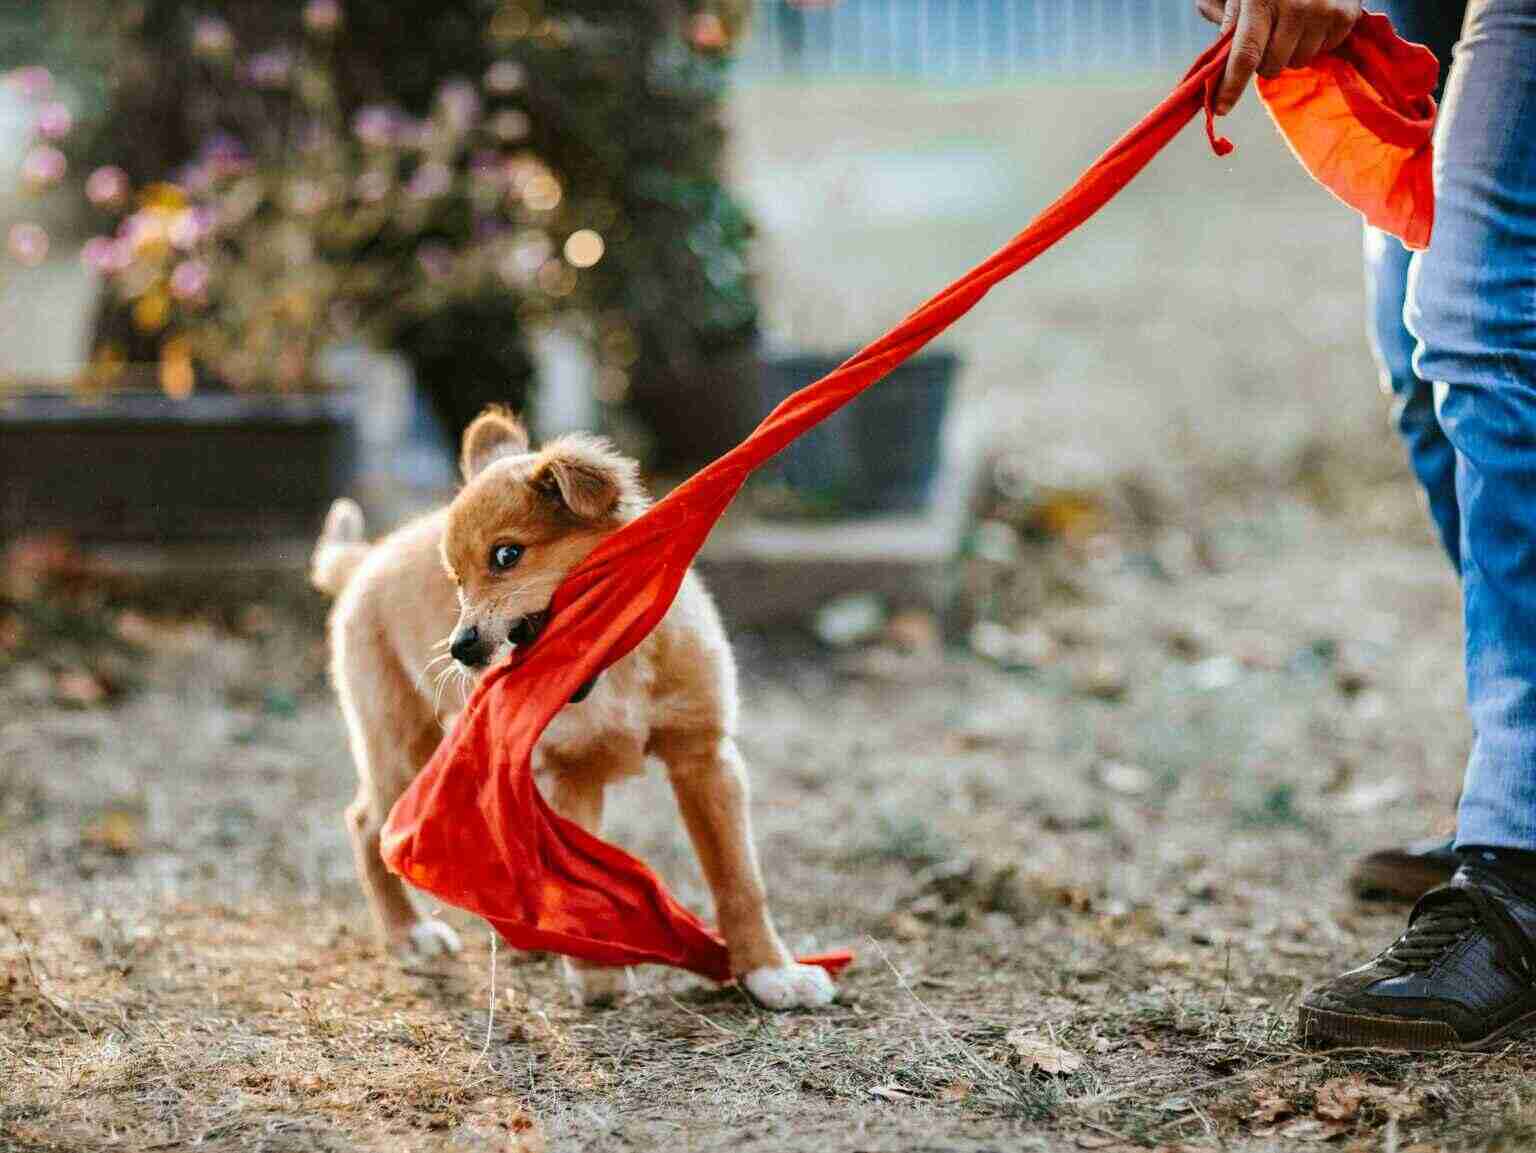 A puppy pulling an orange colored cloth from its owner